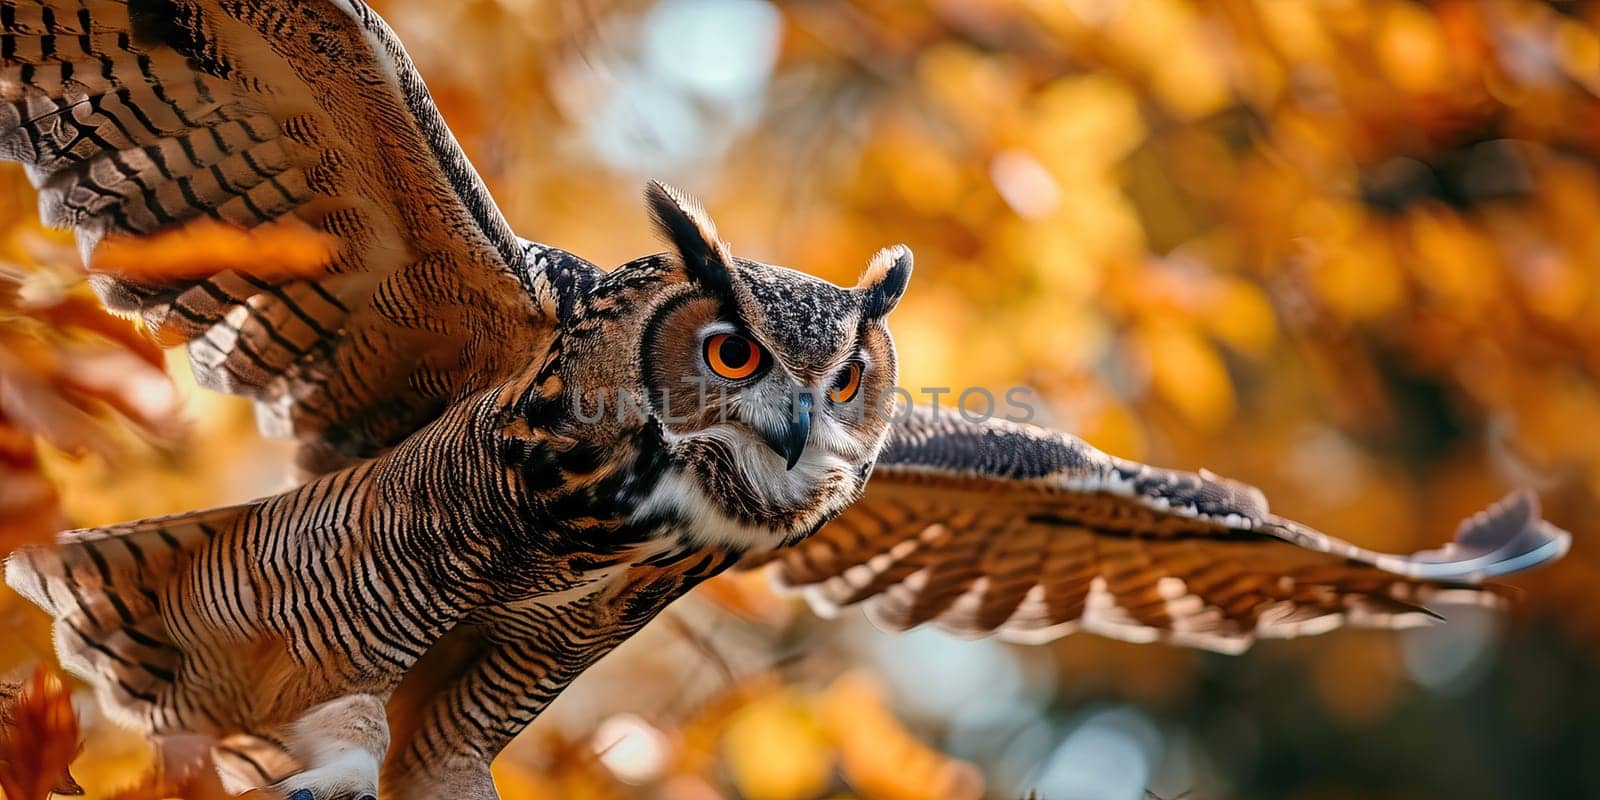 A majestic owl in flight against a backdrop of autumn leaves